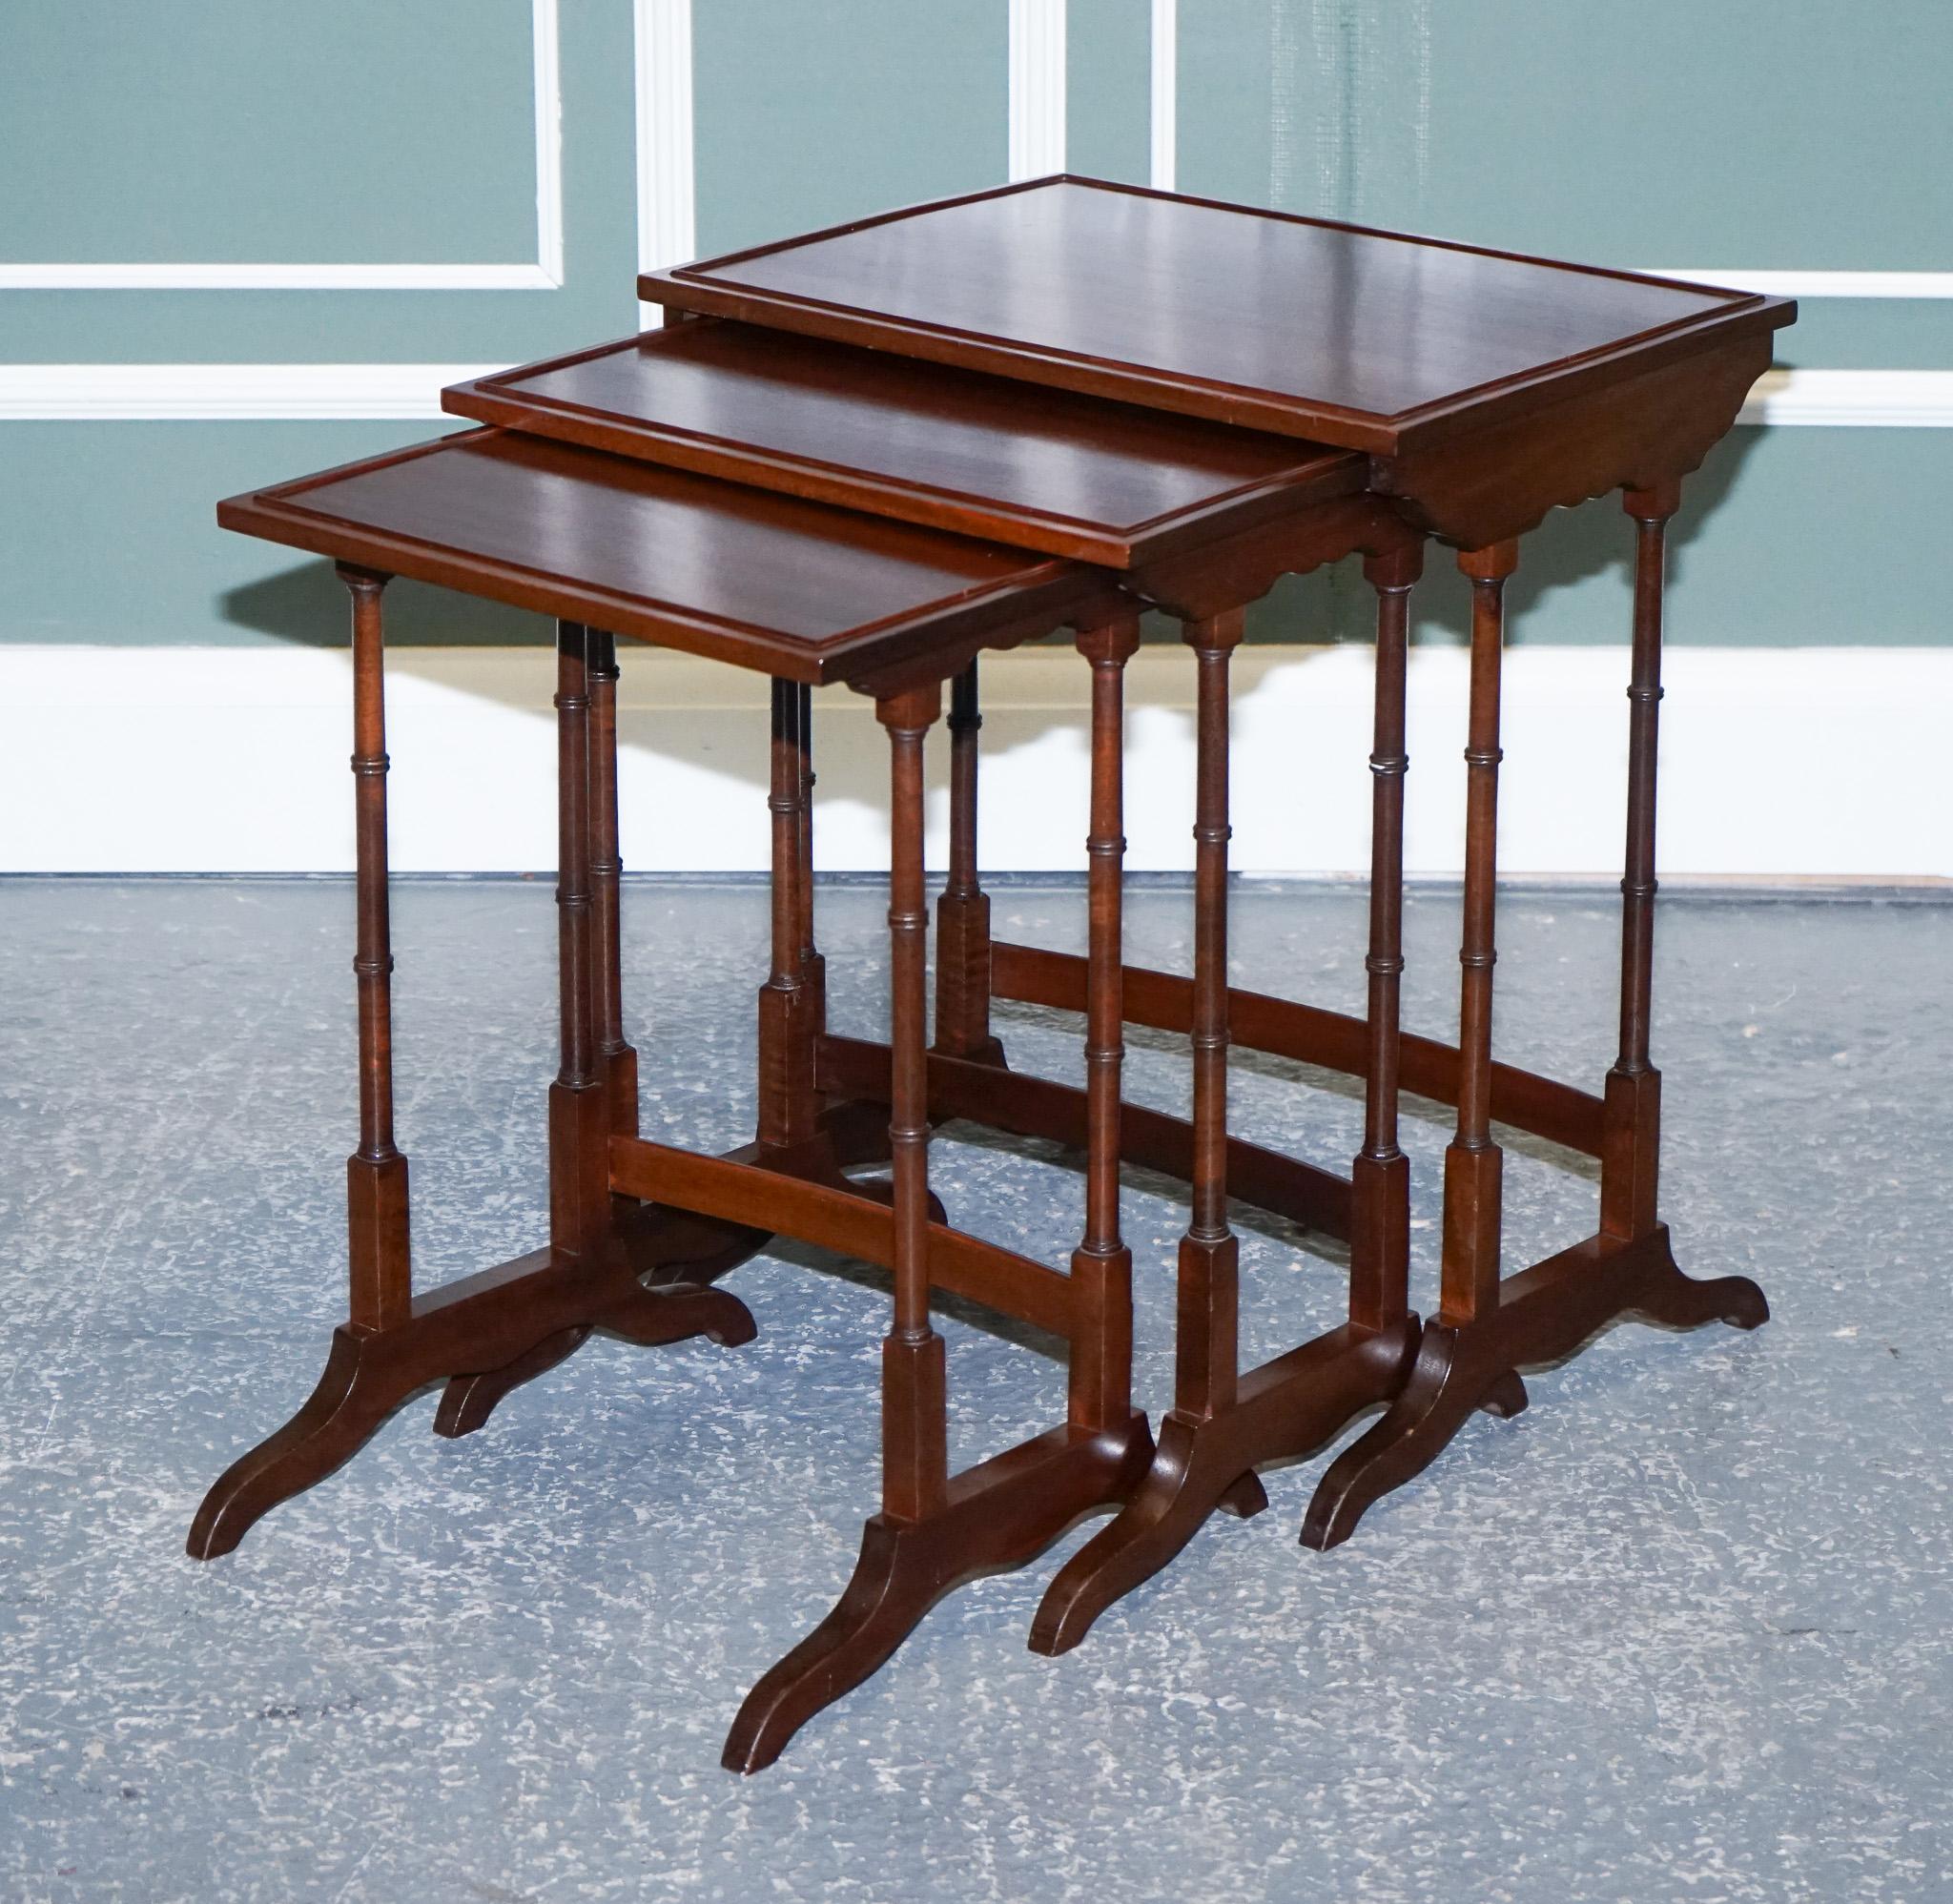 We are delighted to present this original Set Of Three Victorian Nesting tables with bamboo legs.

A very well-made and solid good-looking English nest of tables.
The legs are carved in the bamboo style influenced by China.

We have deep cleaned the